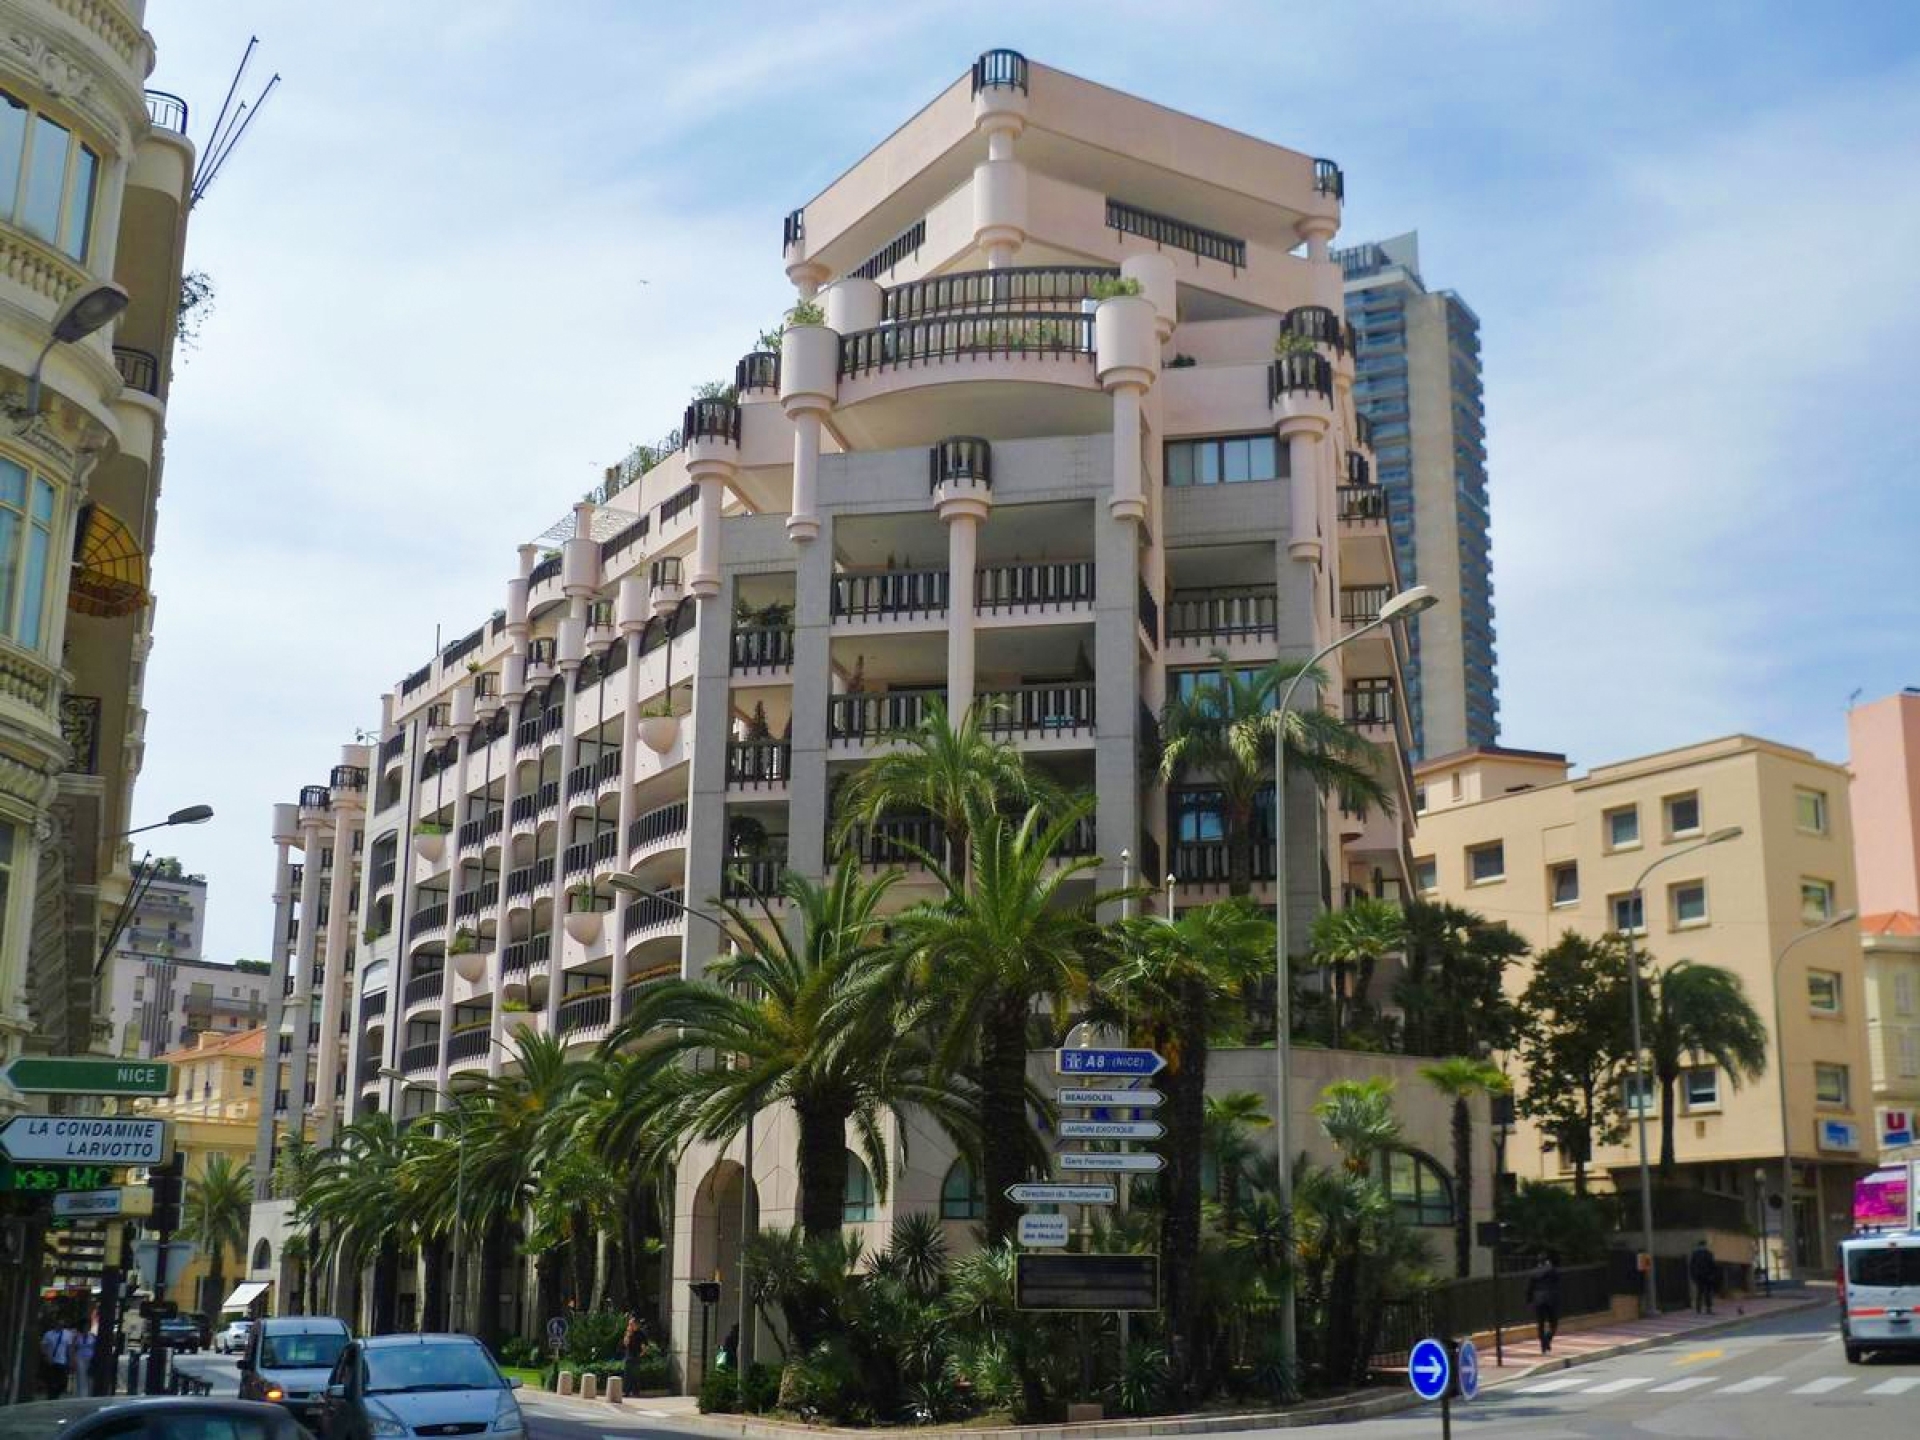 Dotta Offices for sale - MONTE-CARLO PALACE - Carre d'Or - Monaco - imgd